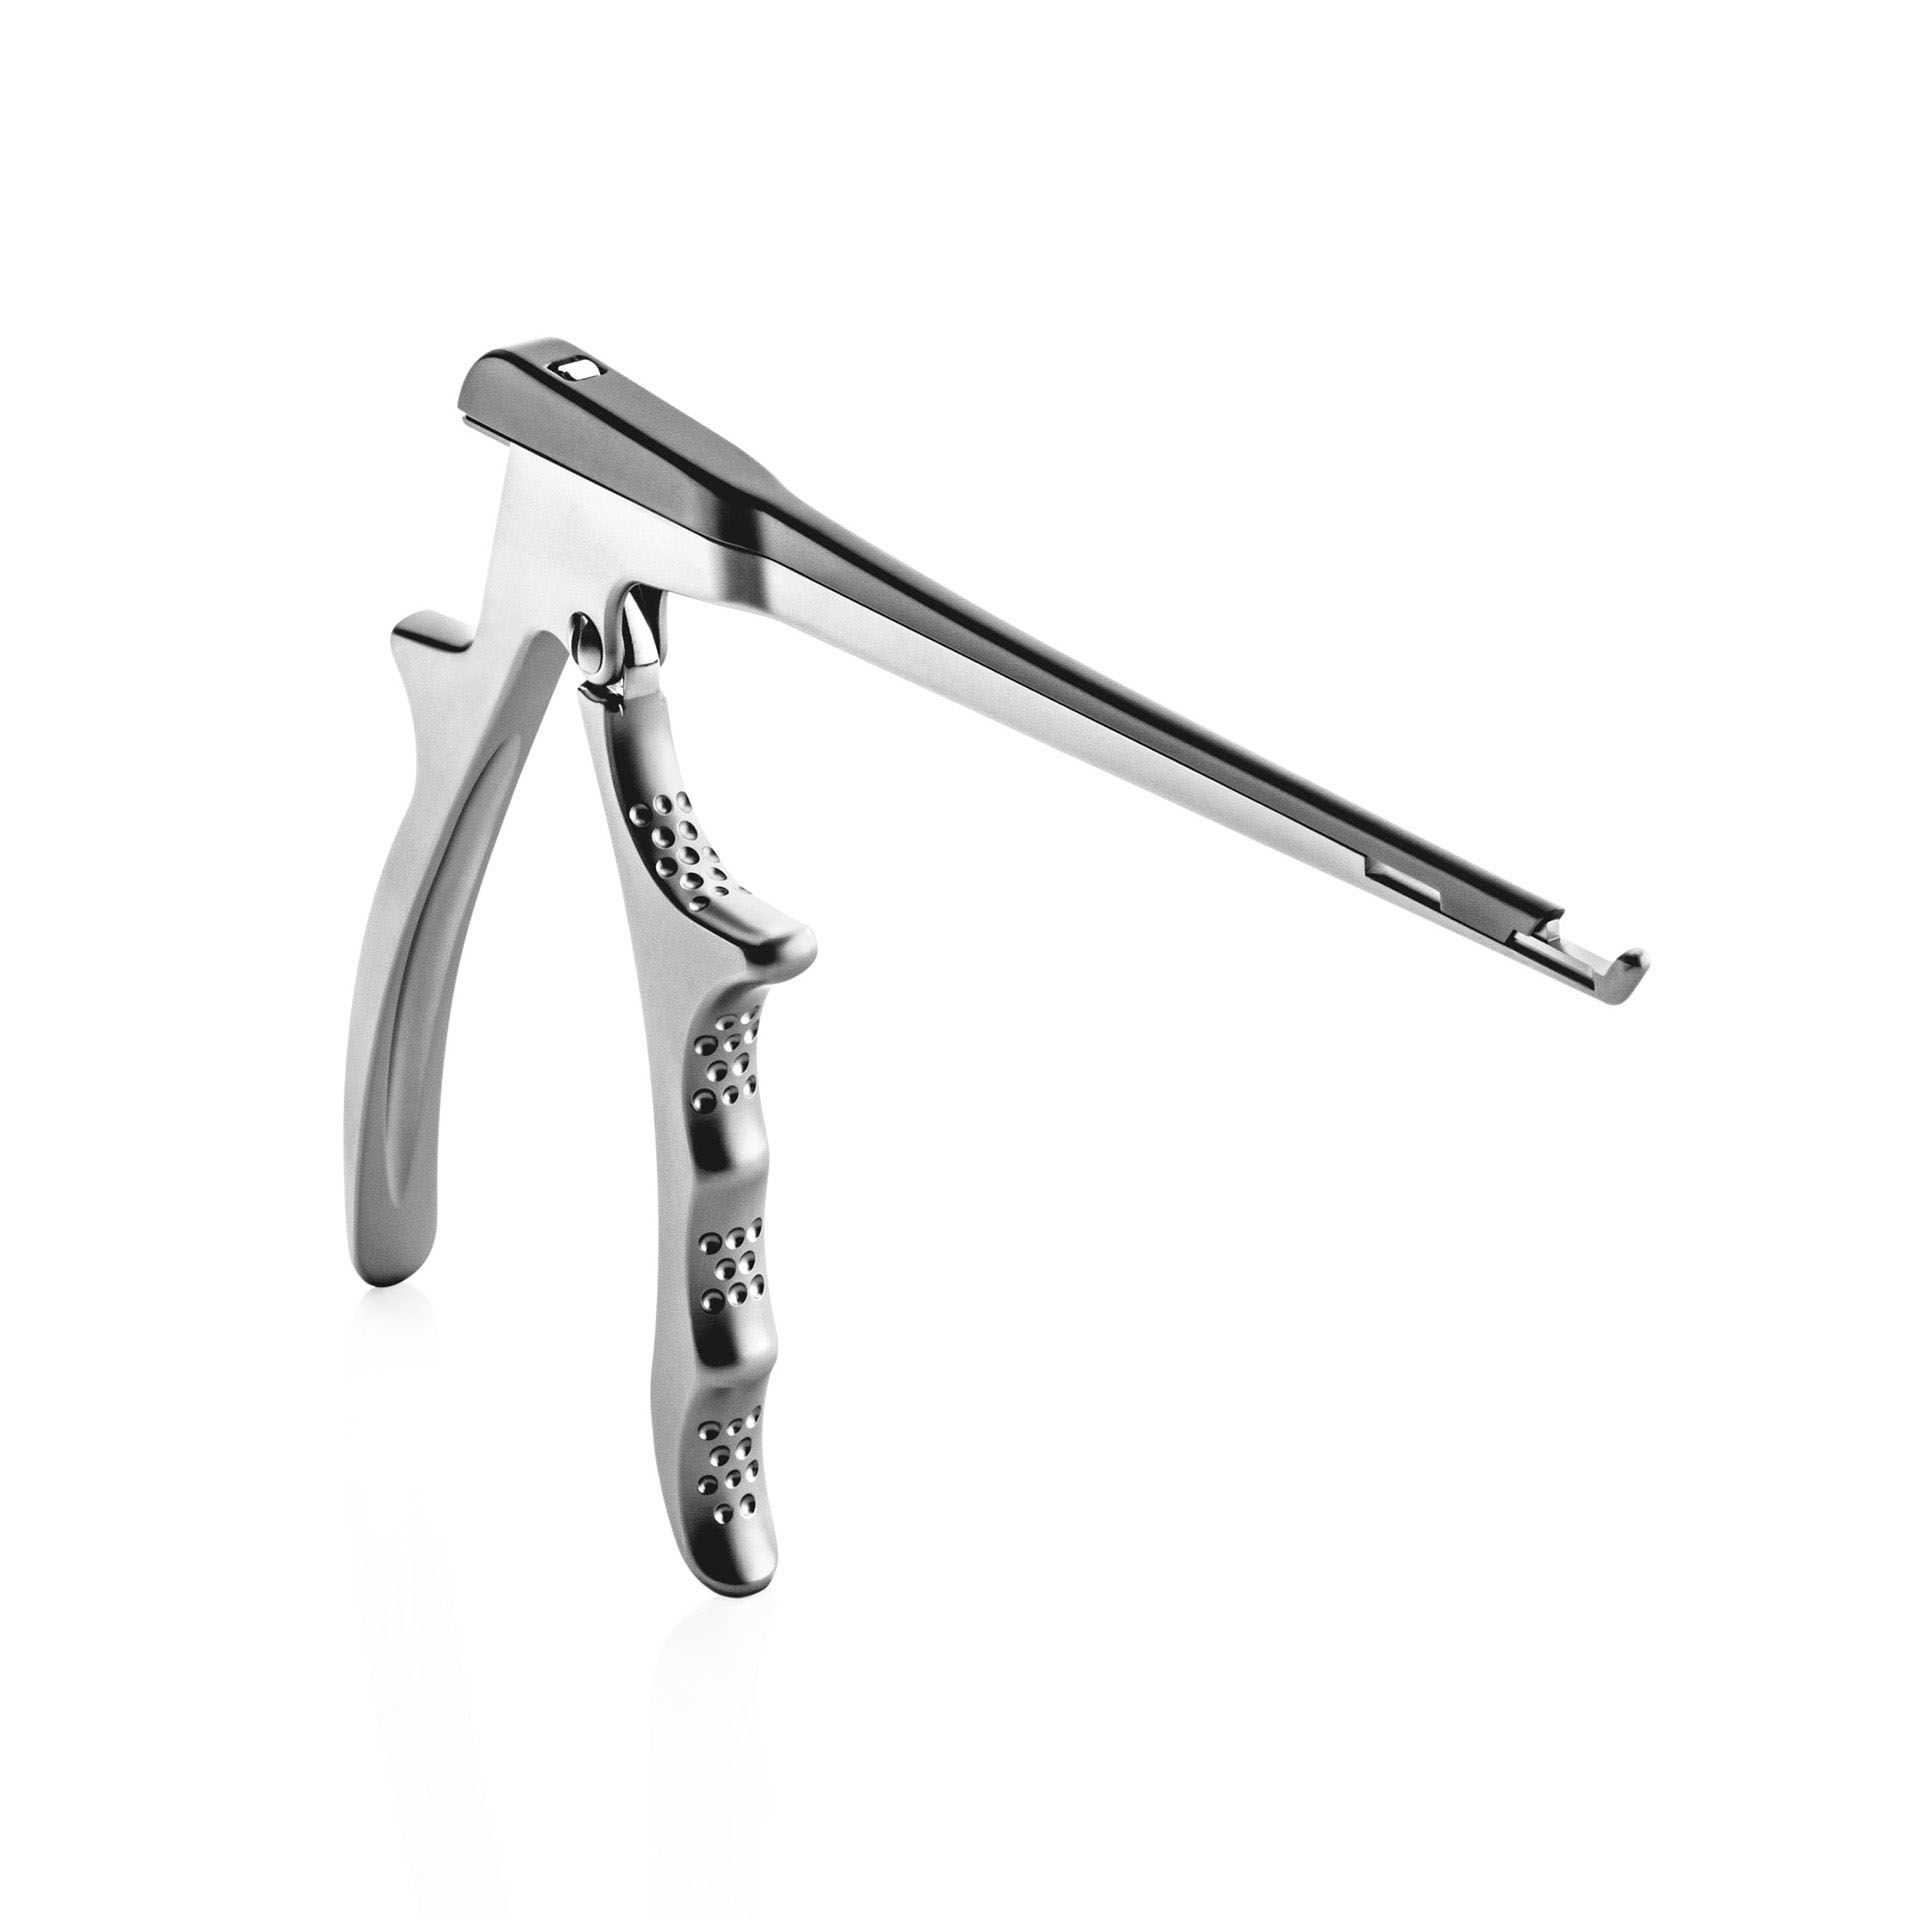 K-Rex™ Kerrison Punch by GEISTER®, a surgical instrument for spinal and neurosurgical procedures.